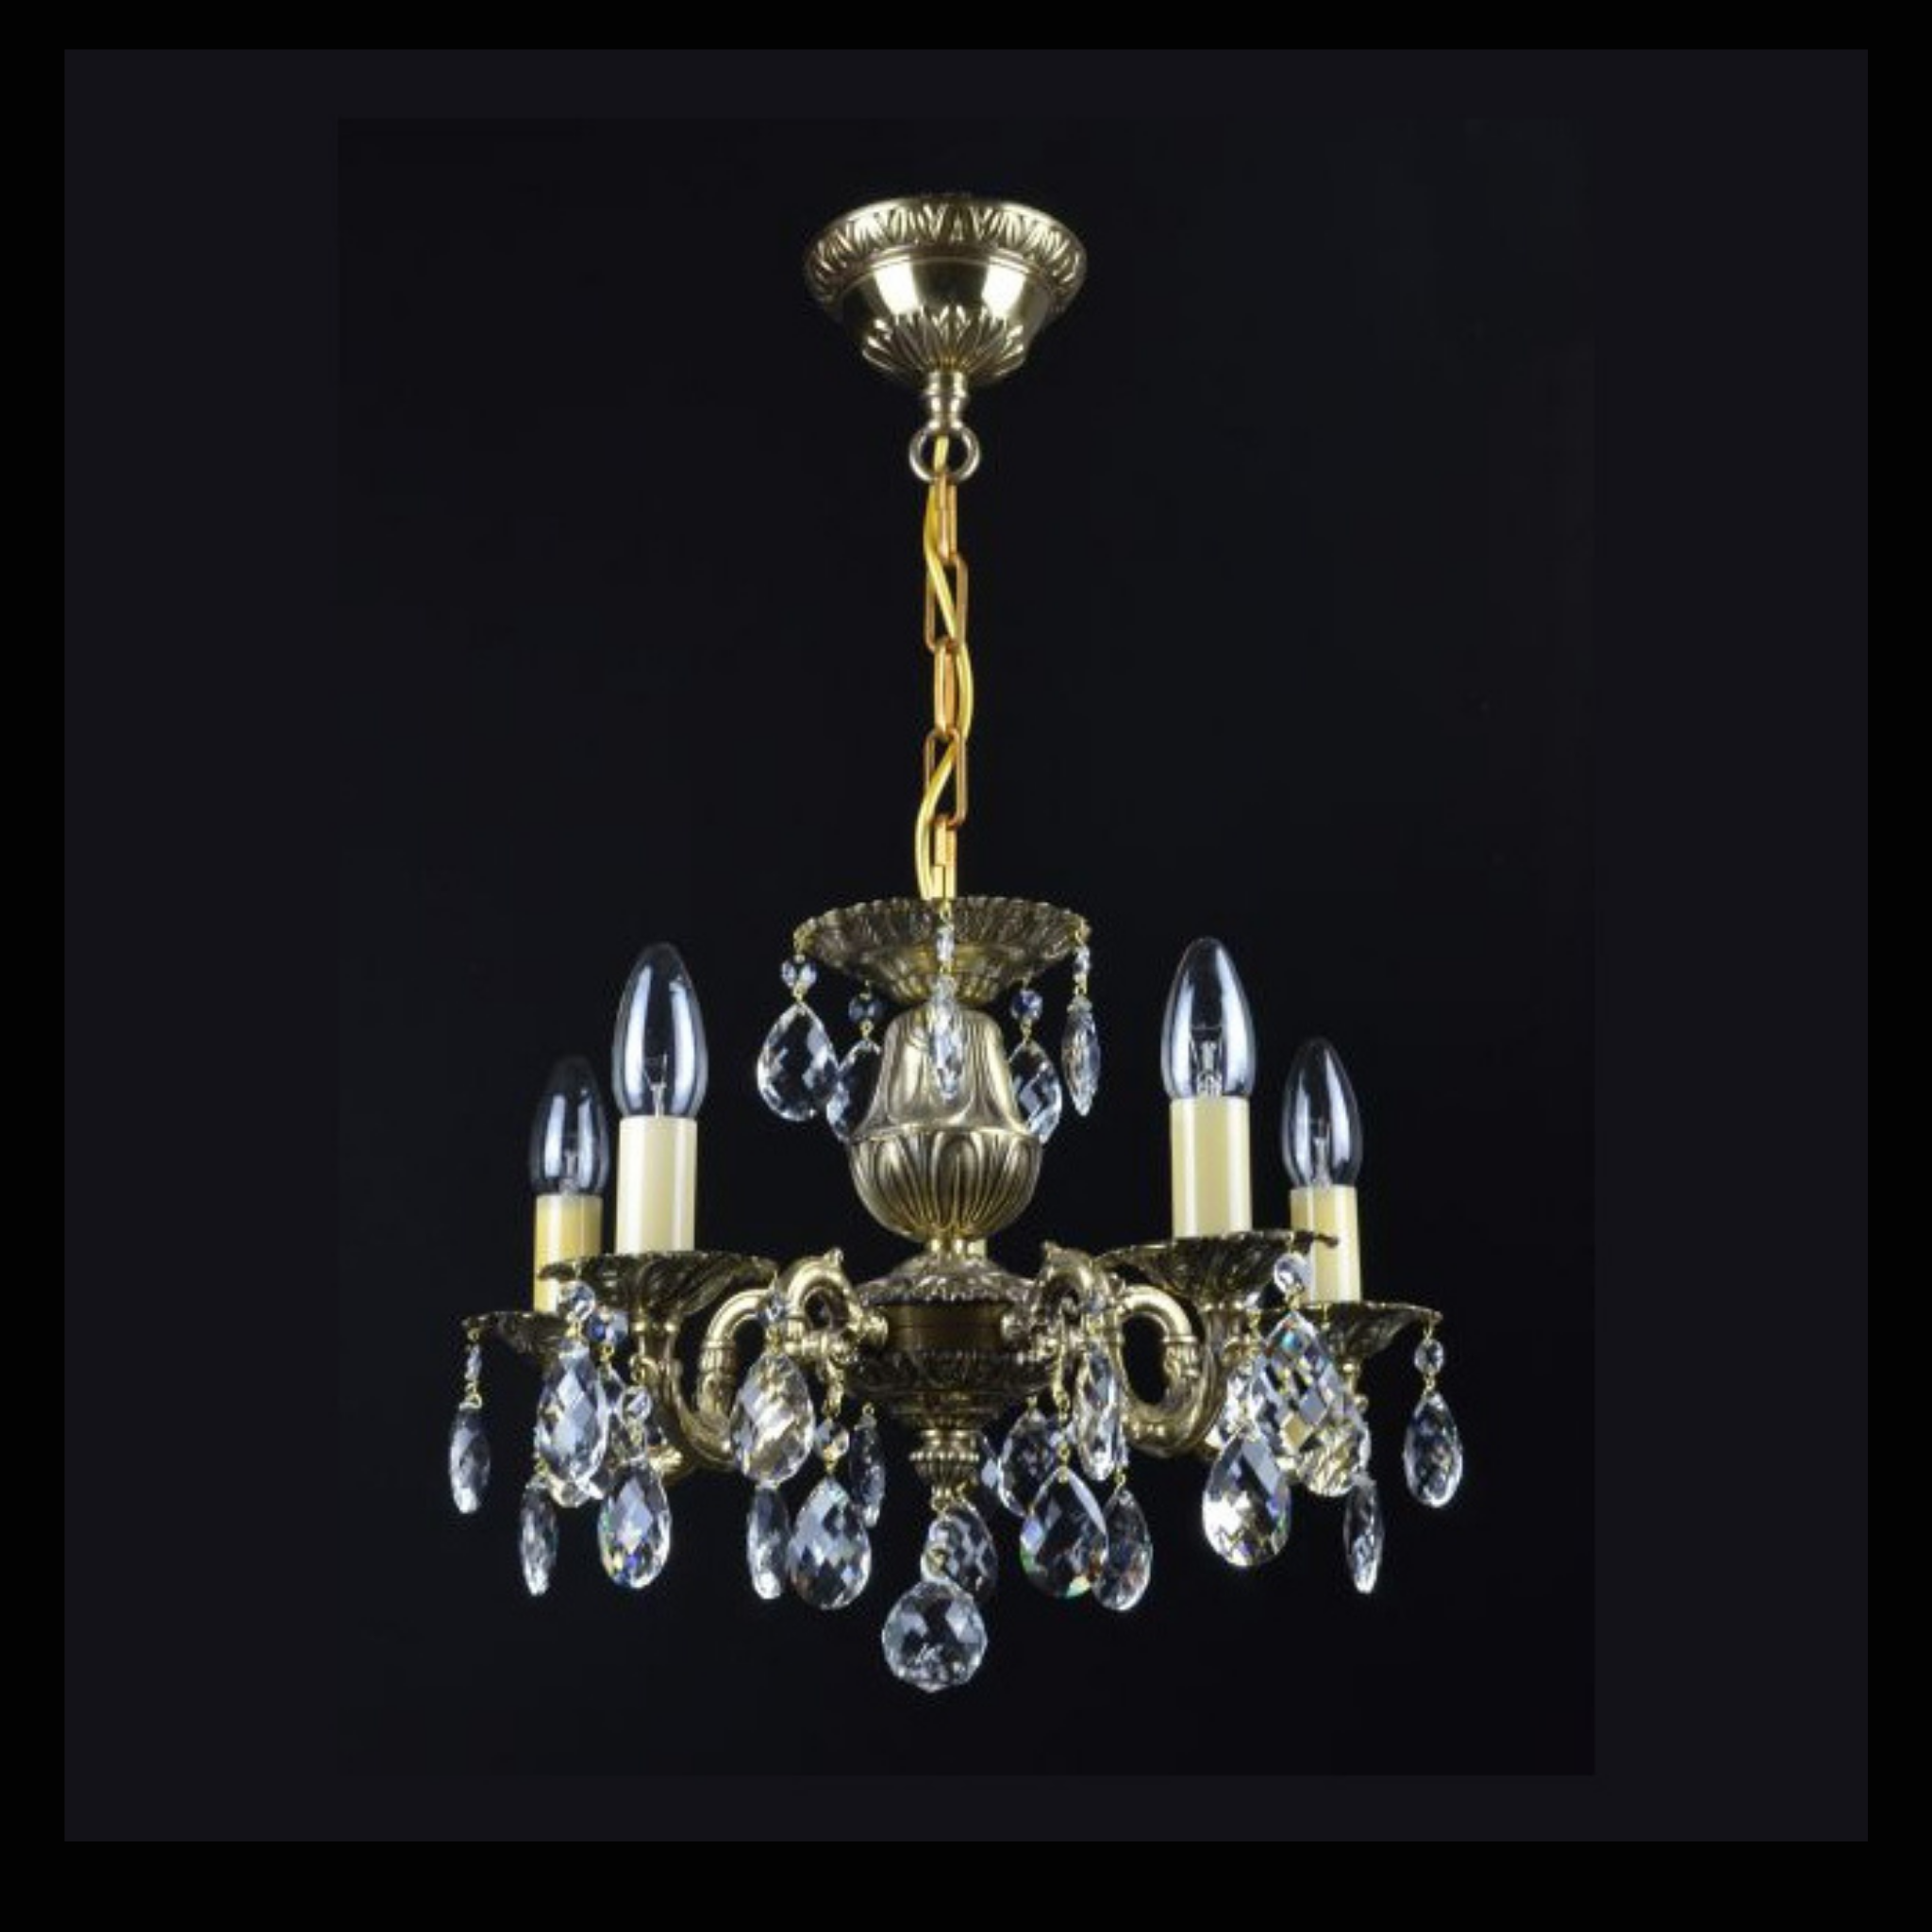 Pluto 5 Crystal Glass Chandelier - Wranovsky - Luxury Lighting Boutique